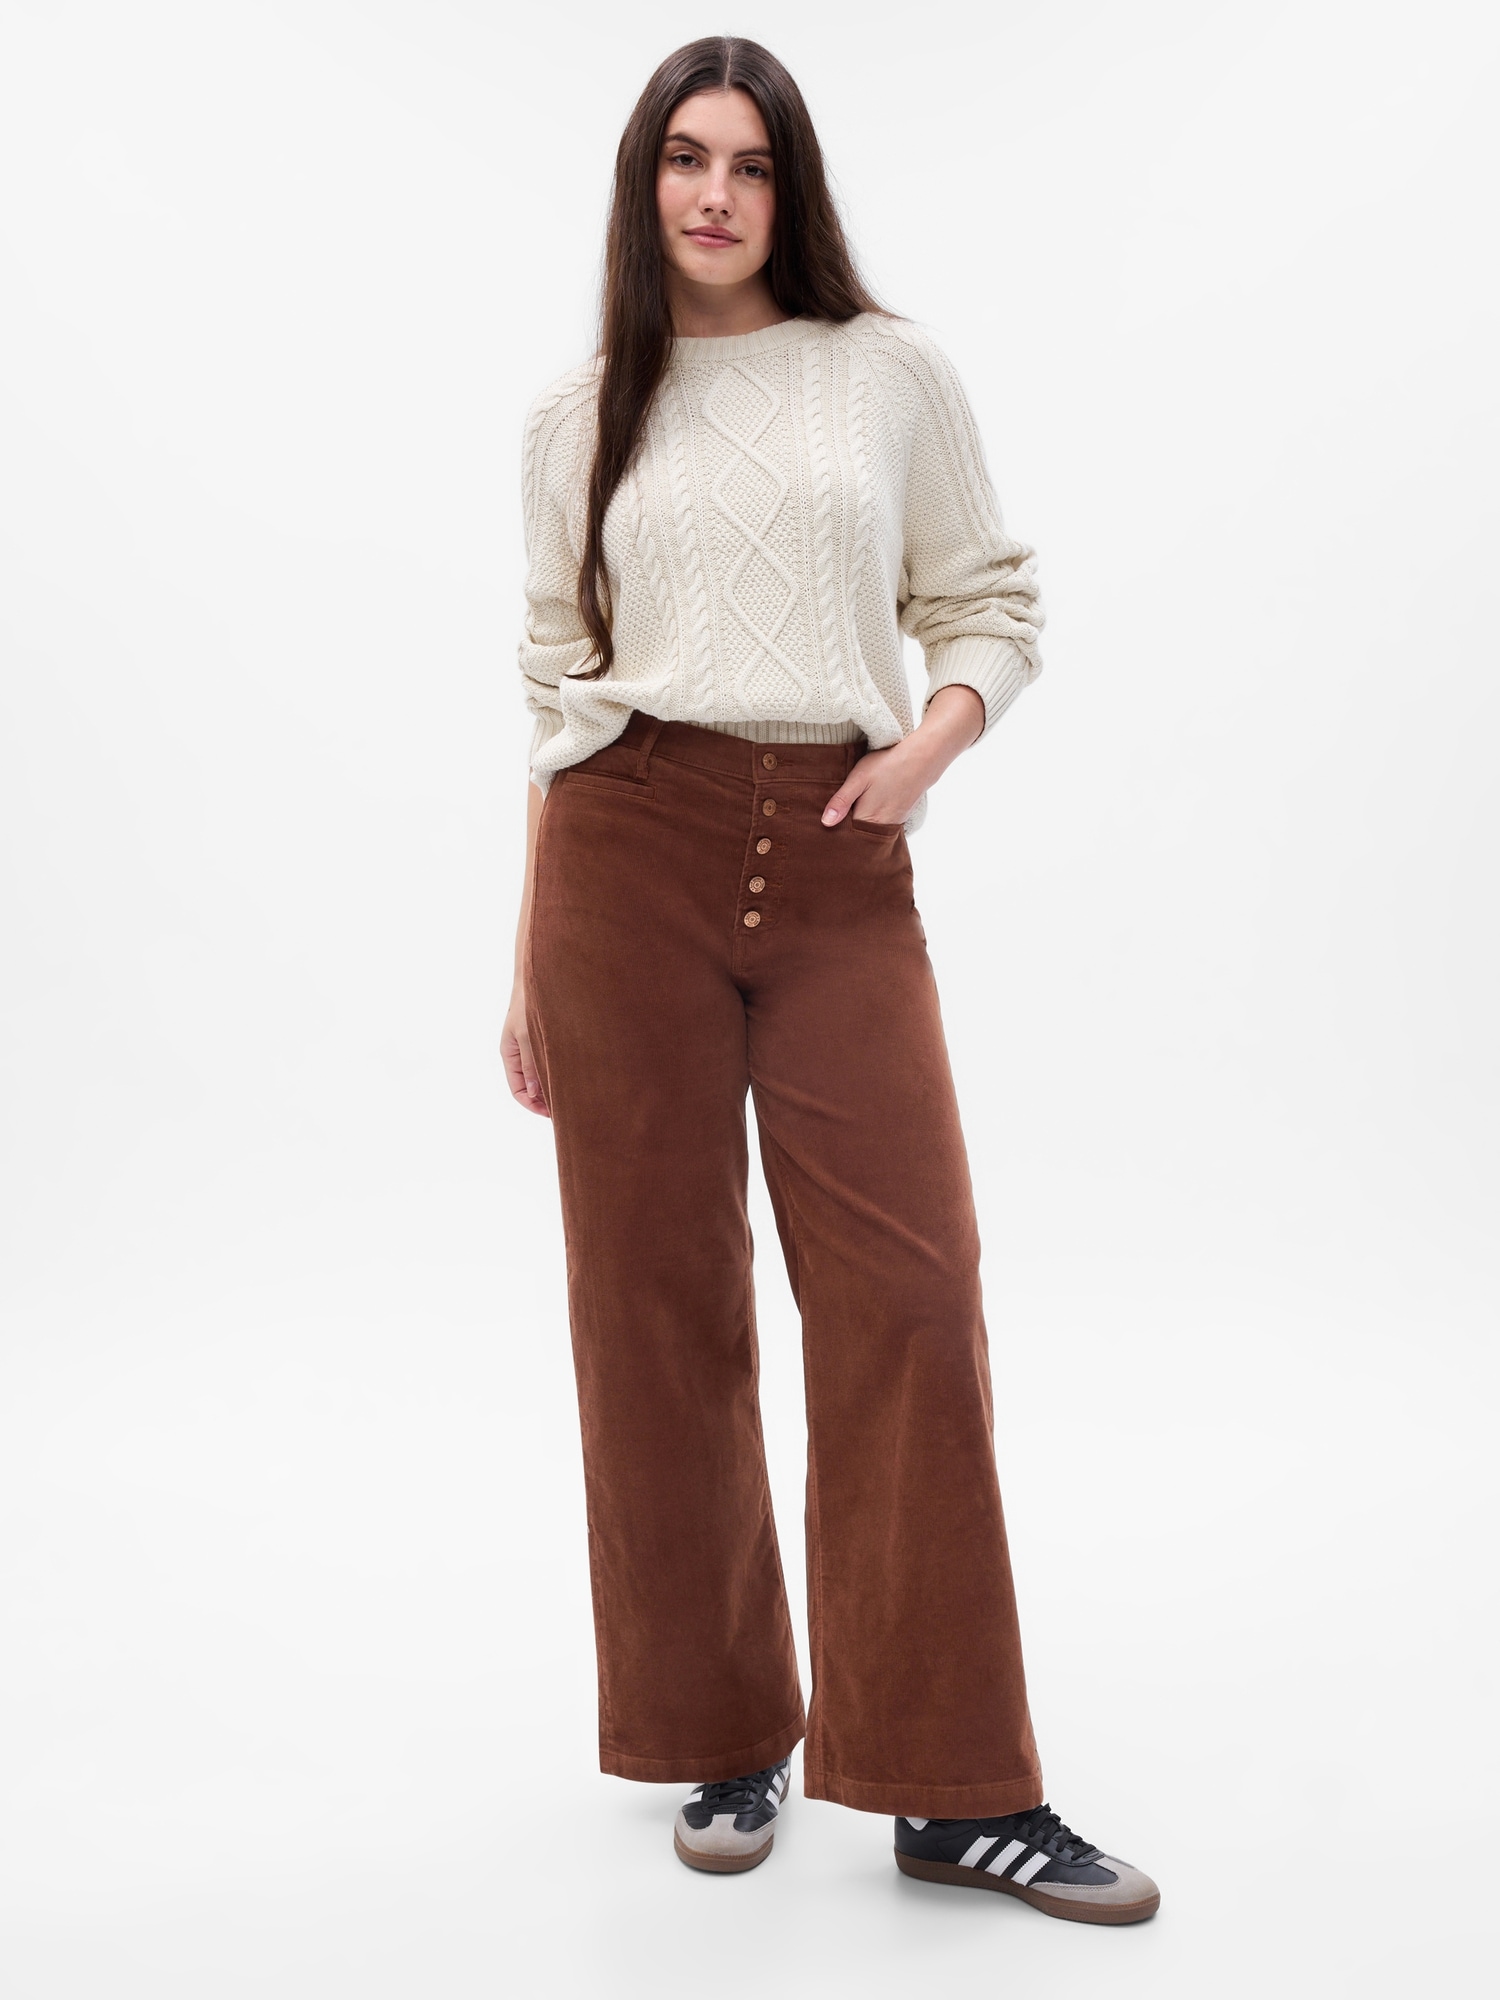 Women's High Waisted Straight Leg Corduroy Pants Loose Fit